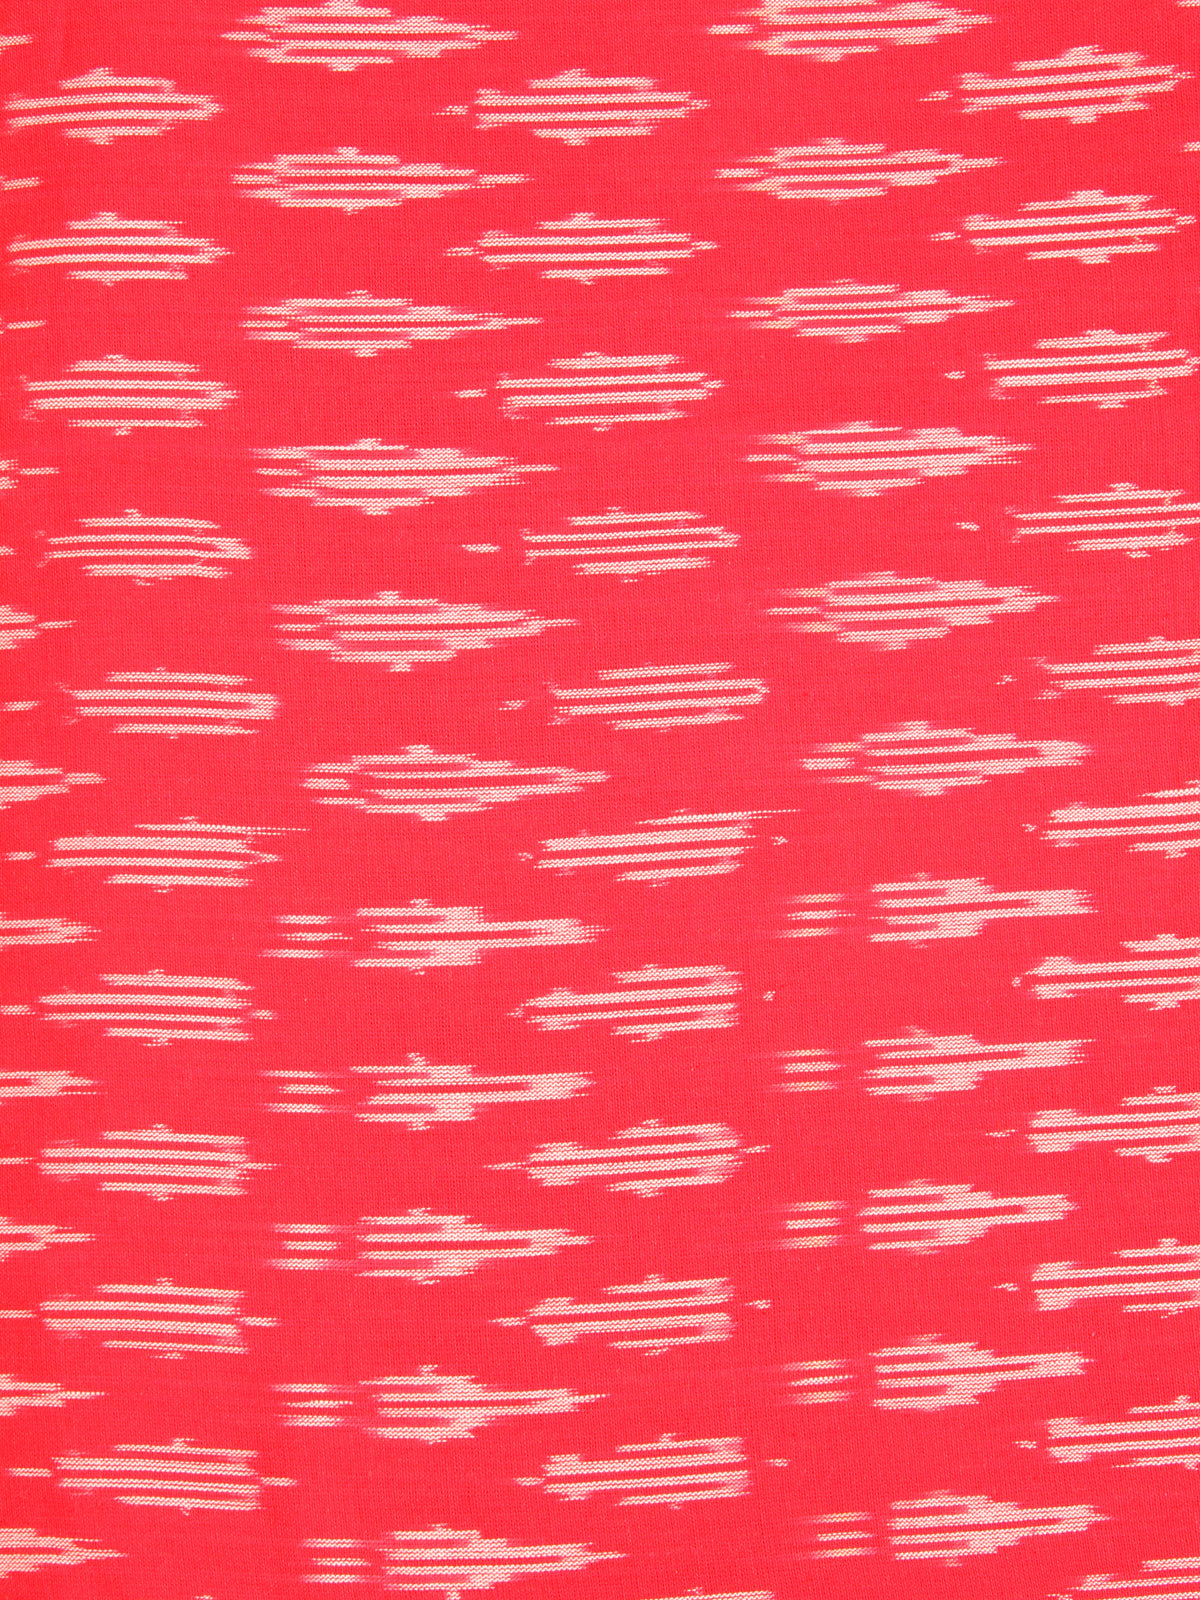 Coral Ivory Hand Woven Ikat Handloom Cotton Fabric Per Meter - F002F2428